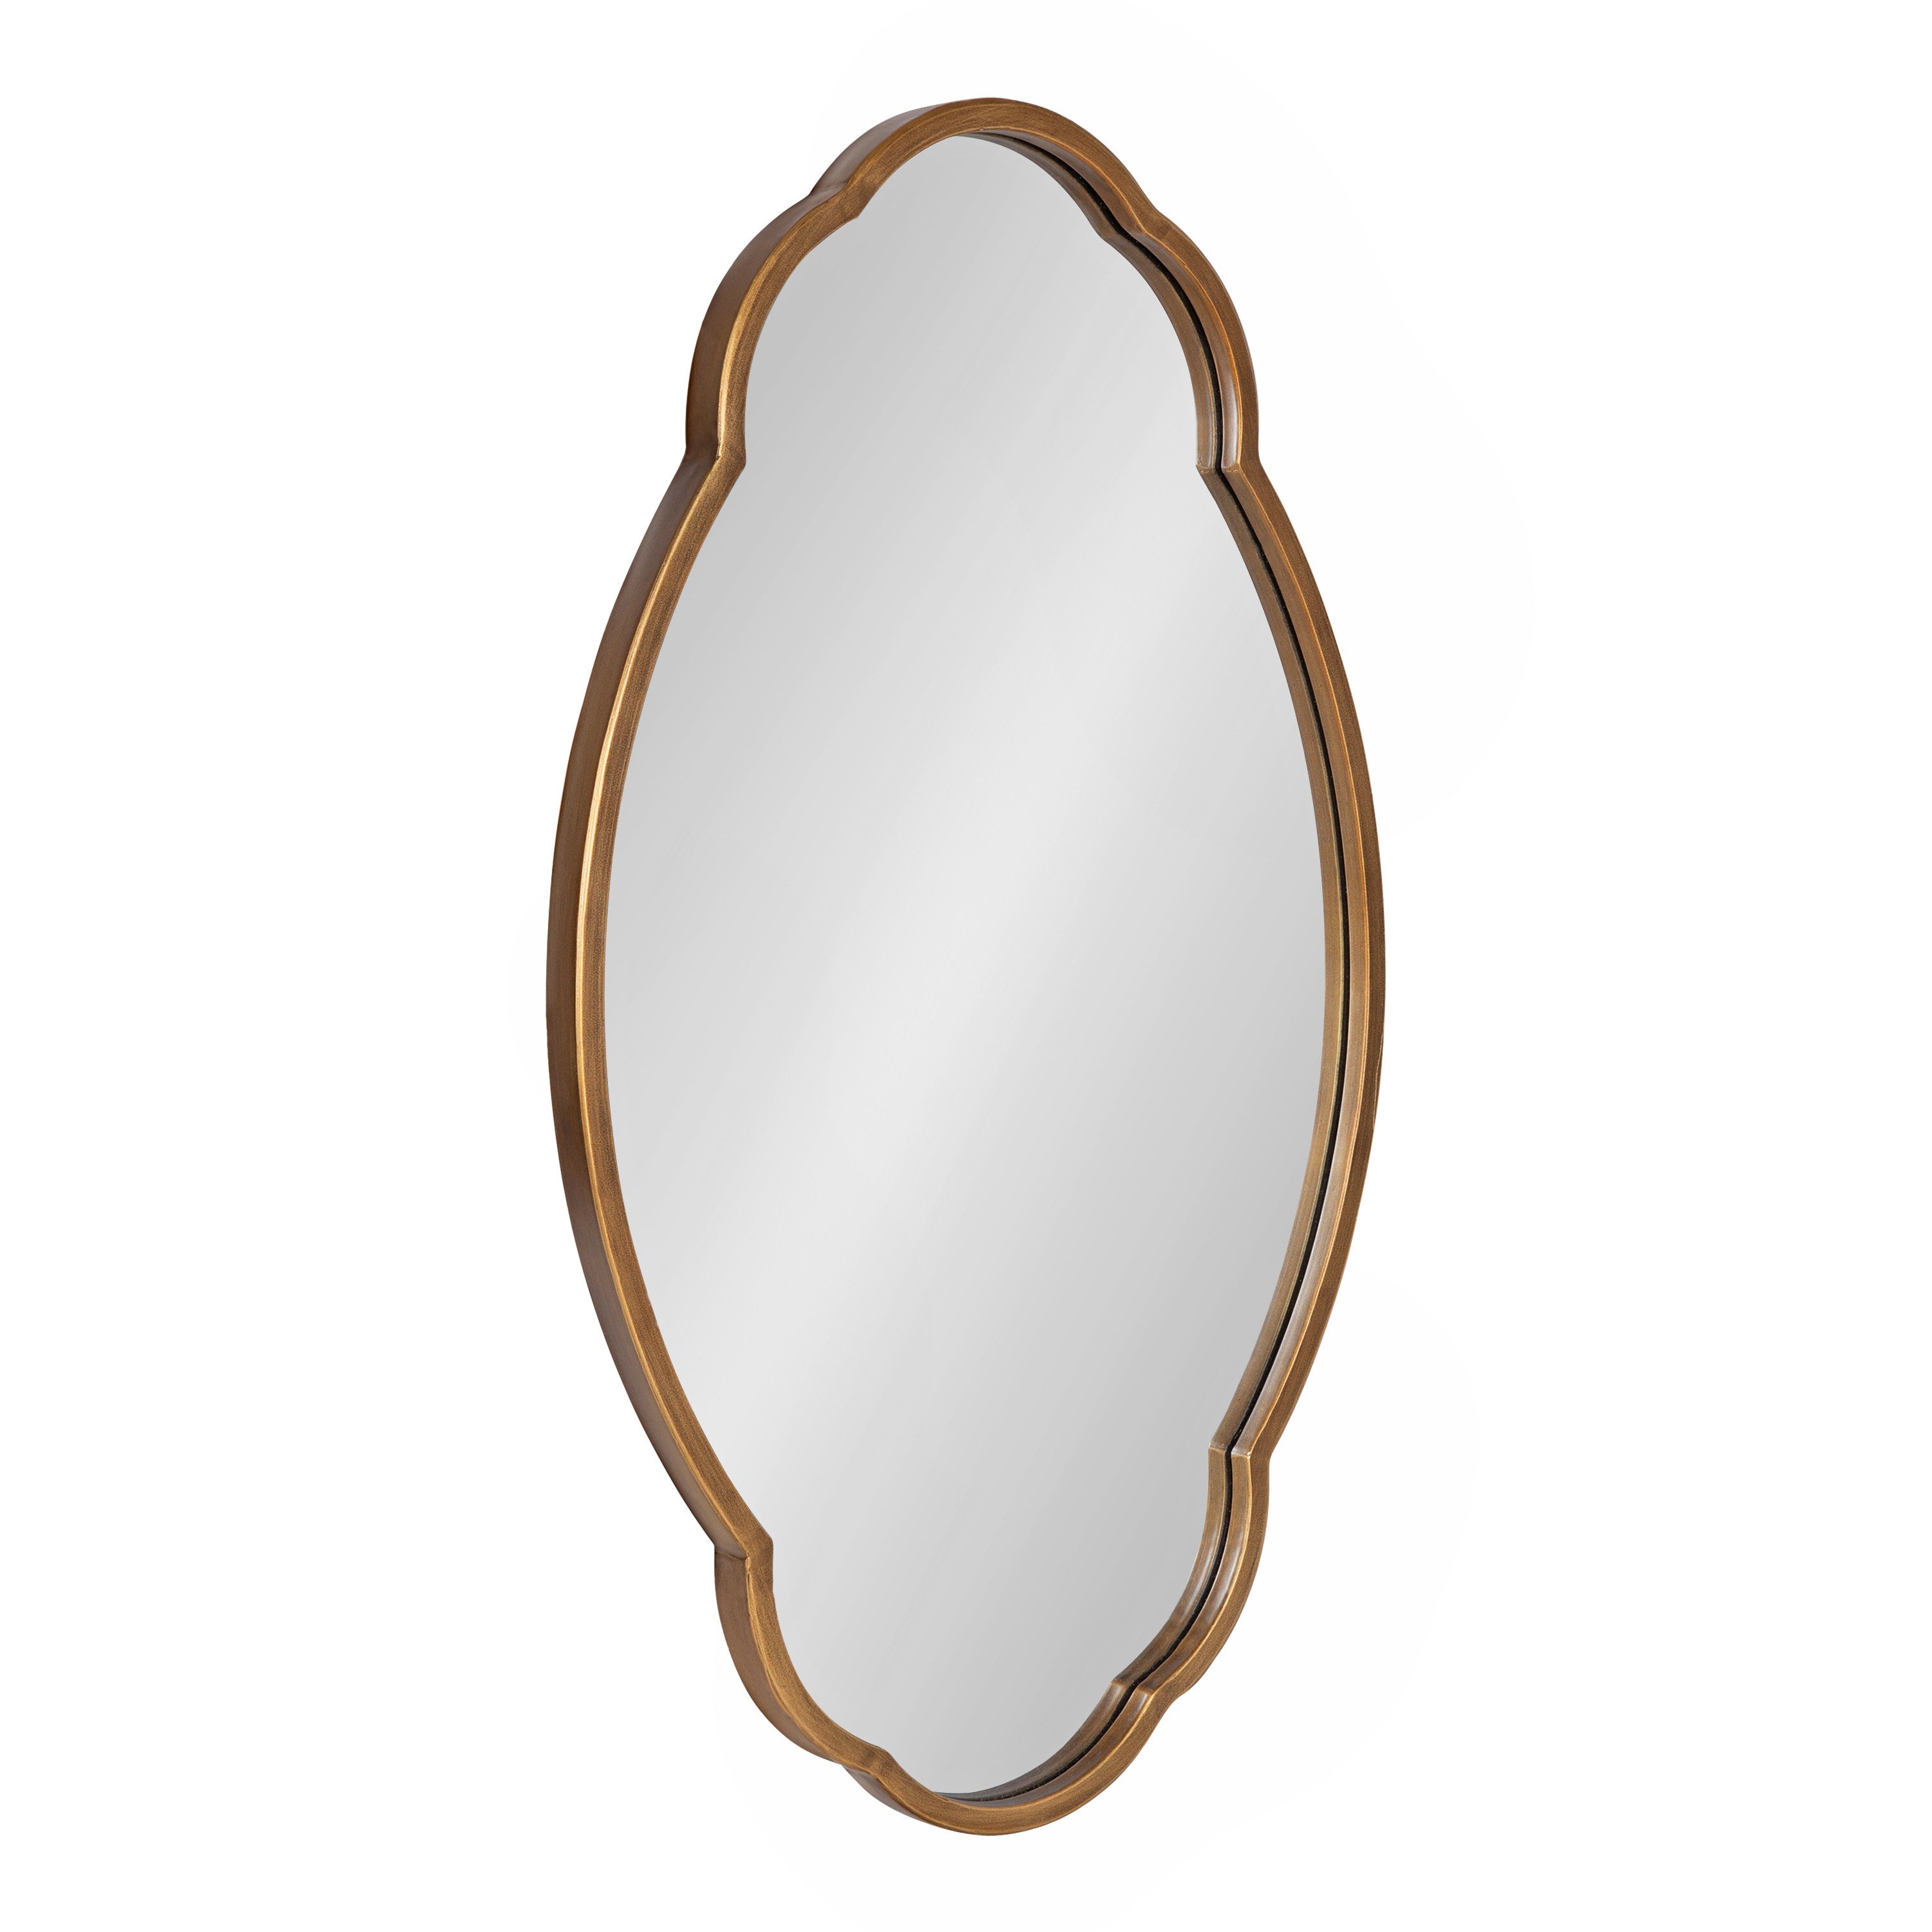 Magritte Scalloped Oval Wall Mirror